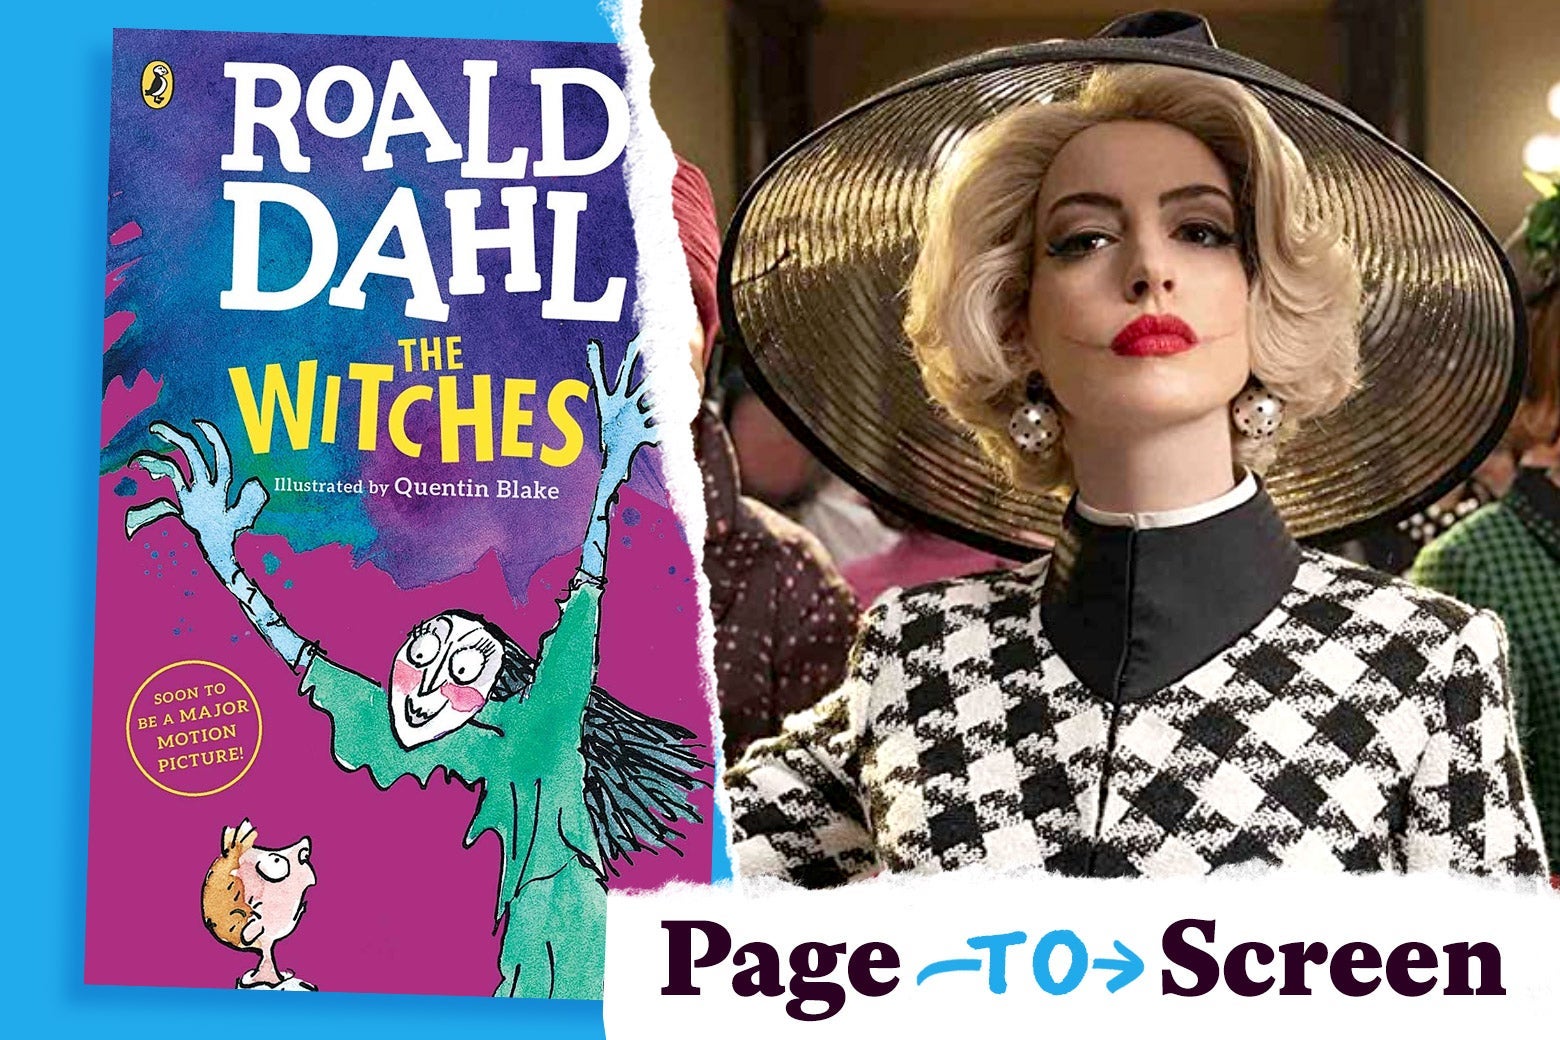 The Witches movie vs. book: HBO's adaptation starring Anne Hathaway changes  Roald Dahl's book a lot.